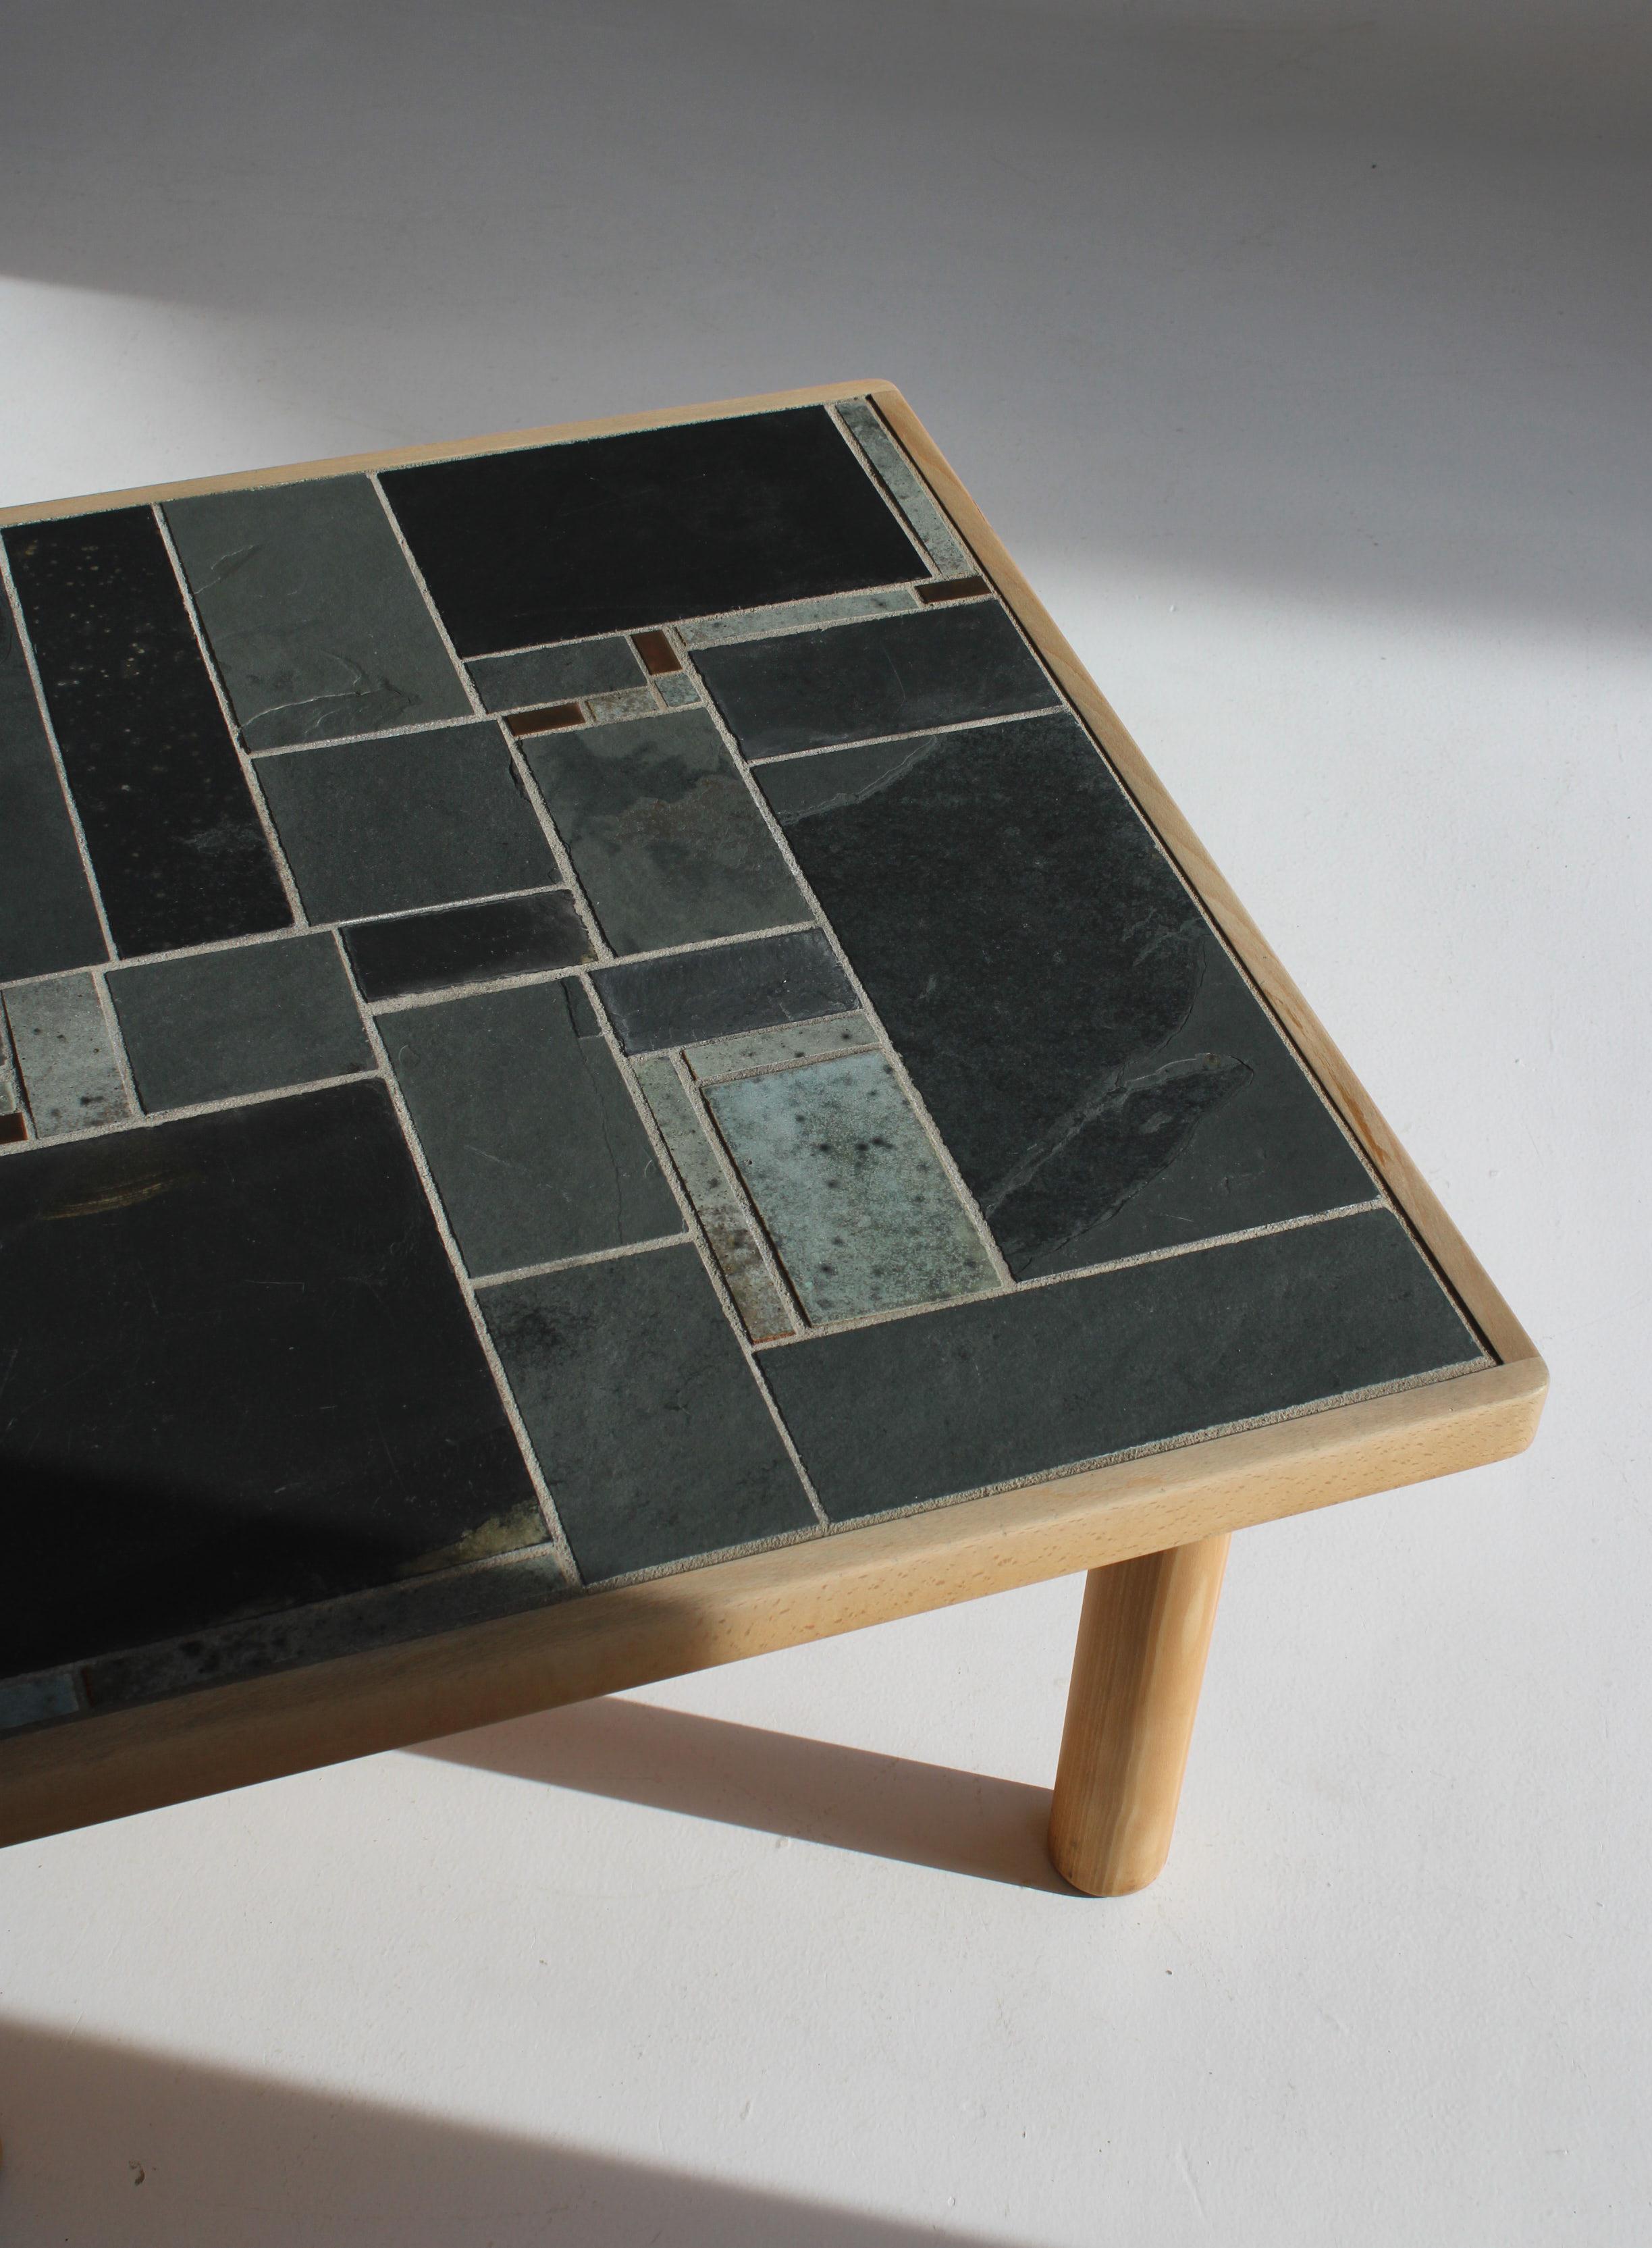 Square Coffee Table in Beechwood and Ceramic Tiles by Sallingboe, Denmark, 1970s For Sale 1